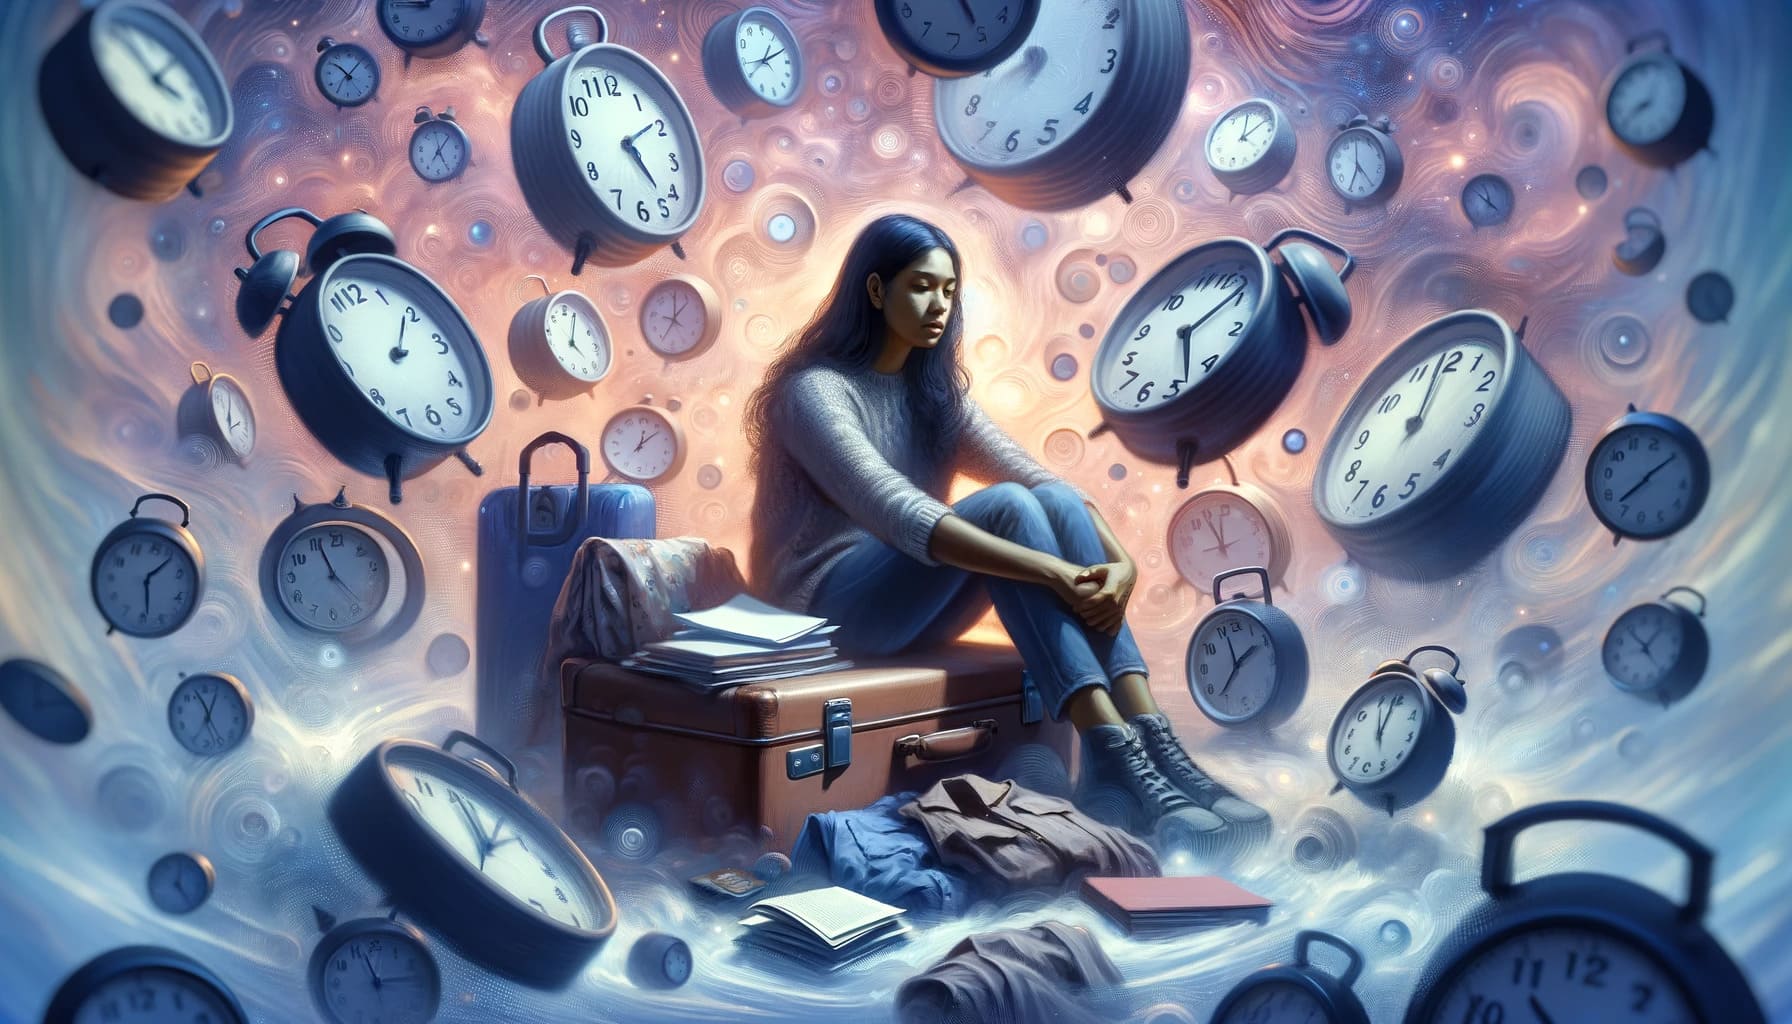 A woman sitting on a suitcase surrounded by numerous clocks, her expression reflecting a mix of determination and apprehension, as if she is caught between the dreams of packing and the fear of running out